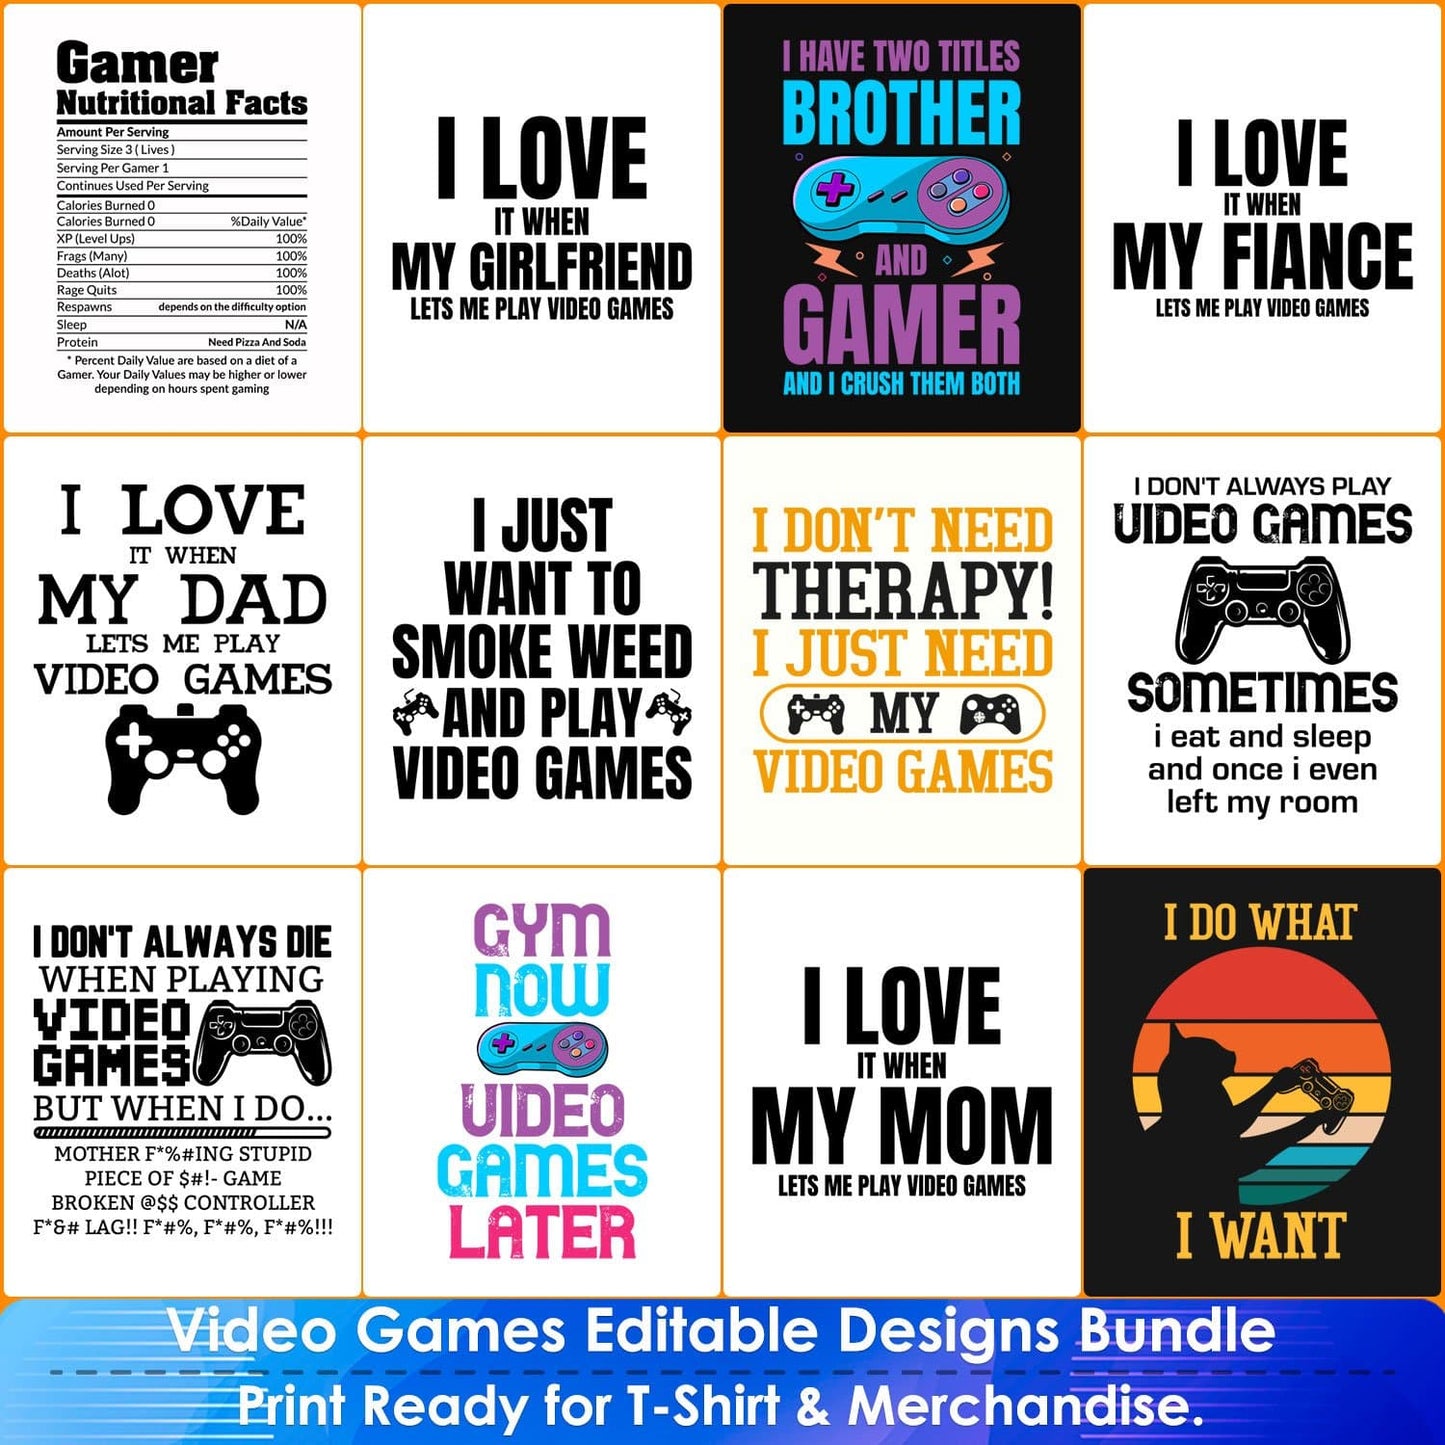 12 editable designs for video gamers that say things like "I don't need therapy! I just need my video games"